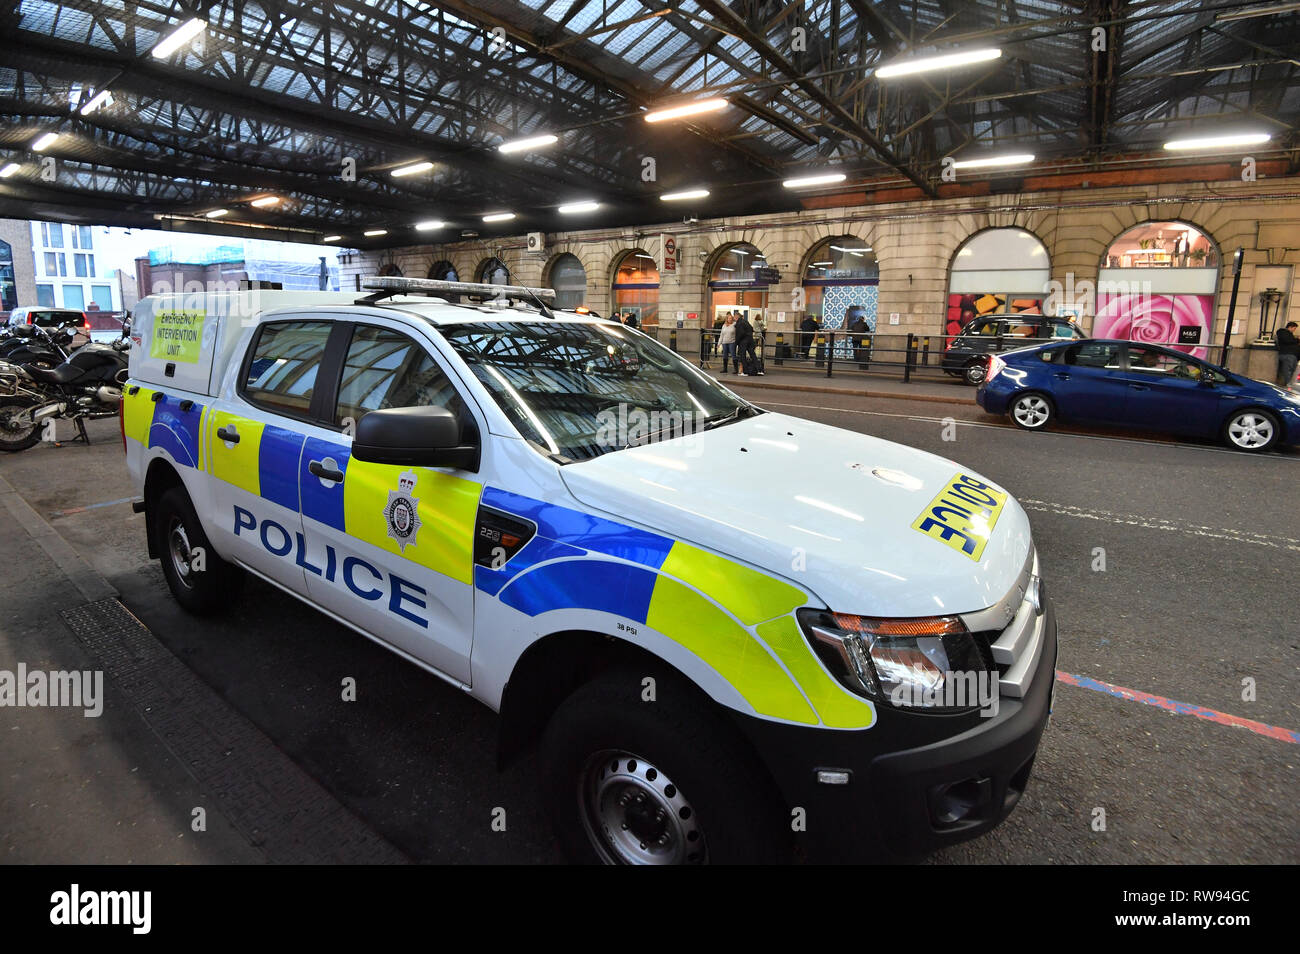 A British Transport Police vehicle at Waterloo Railway Station, London, after three small improvised explosive devices were found at buildings at Heathrow Airport, London City Airport and Waterloo in what the Metropolitan Police Counter Terrorism Command said was being treated as a 'linked series'. Stock Photo